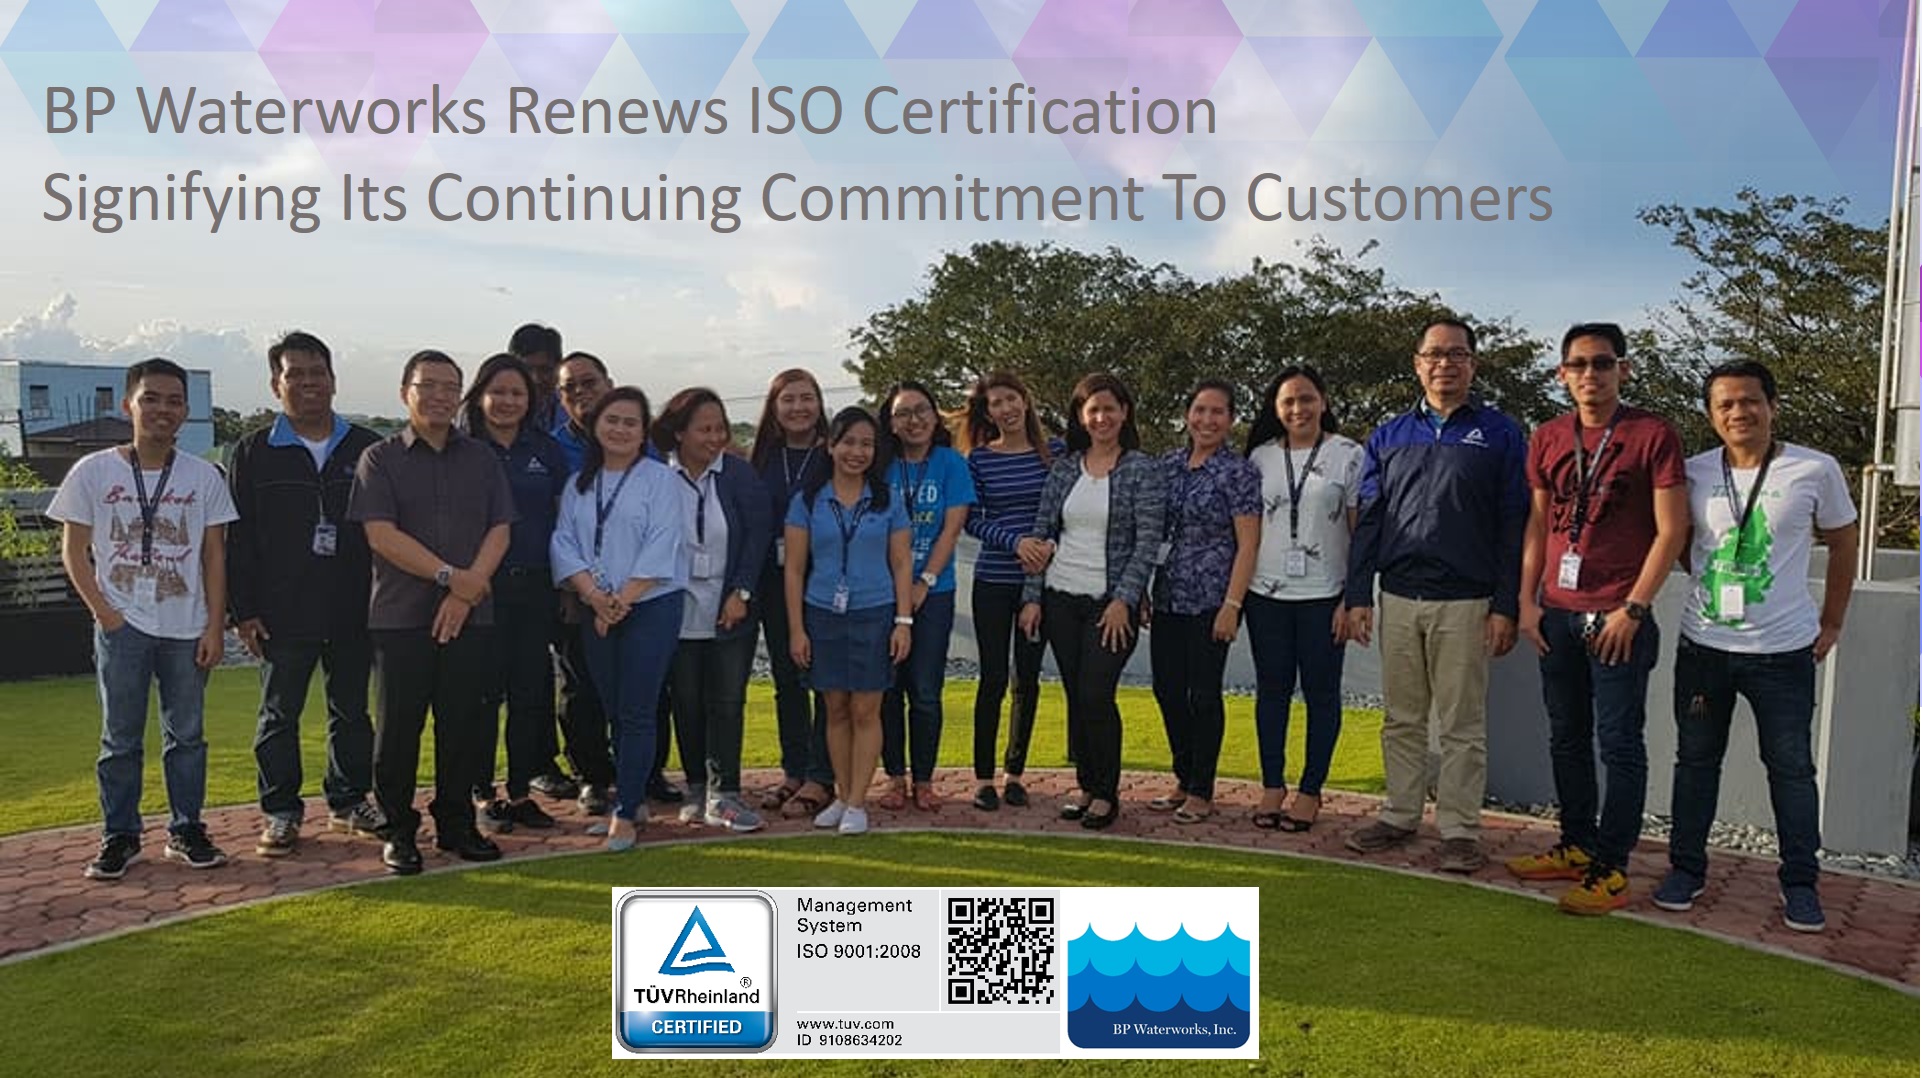 BP Waterworks Reaffirms Its Commitment To Customer Excellence By Renewing ISO Certification